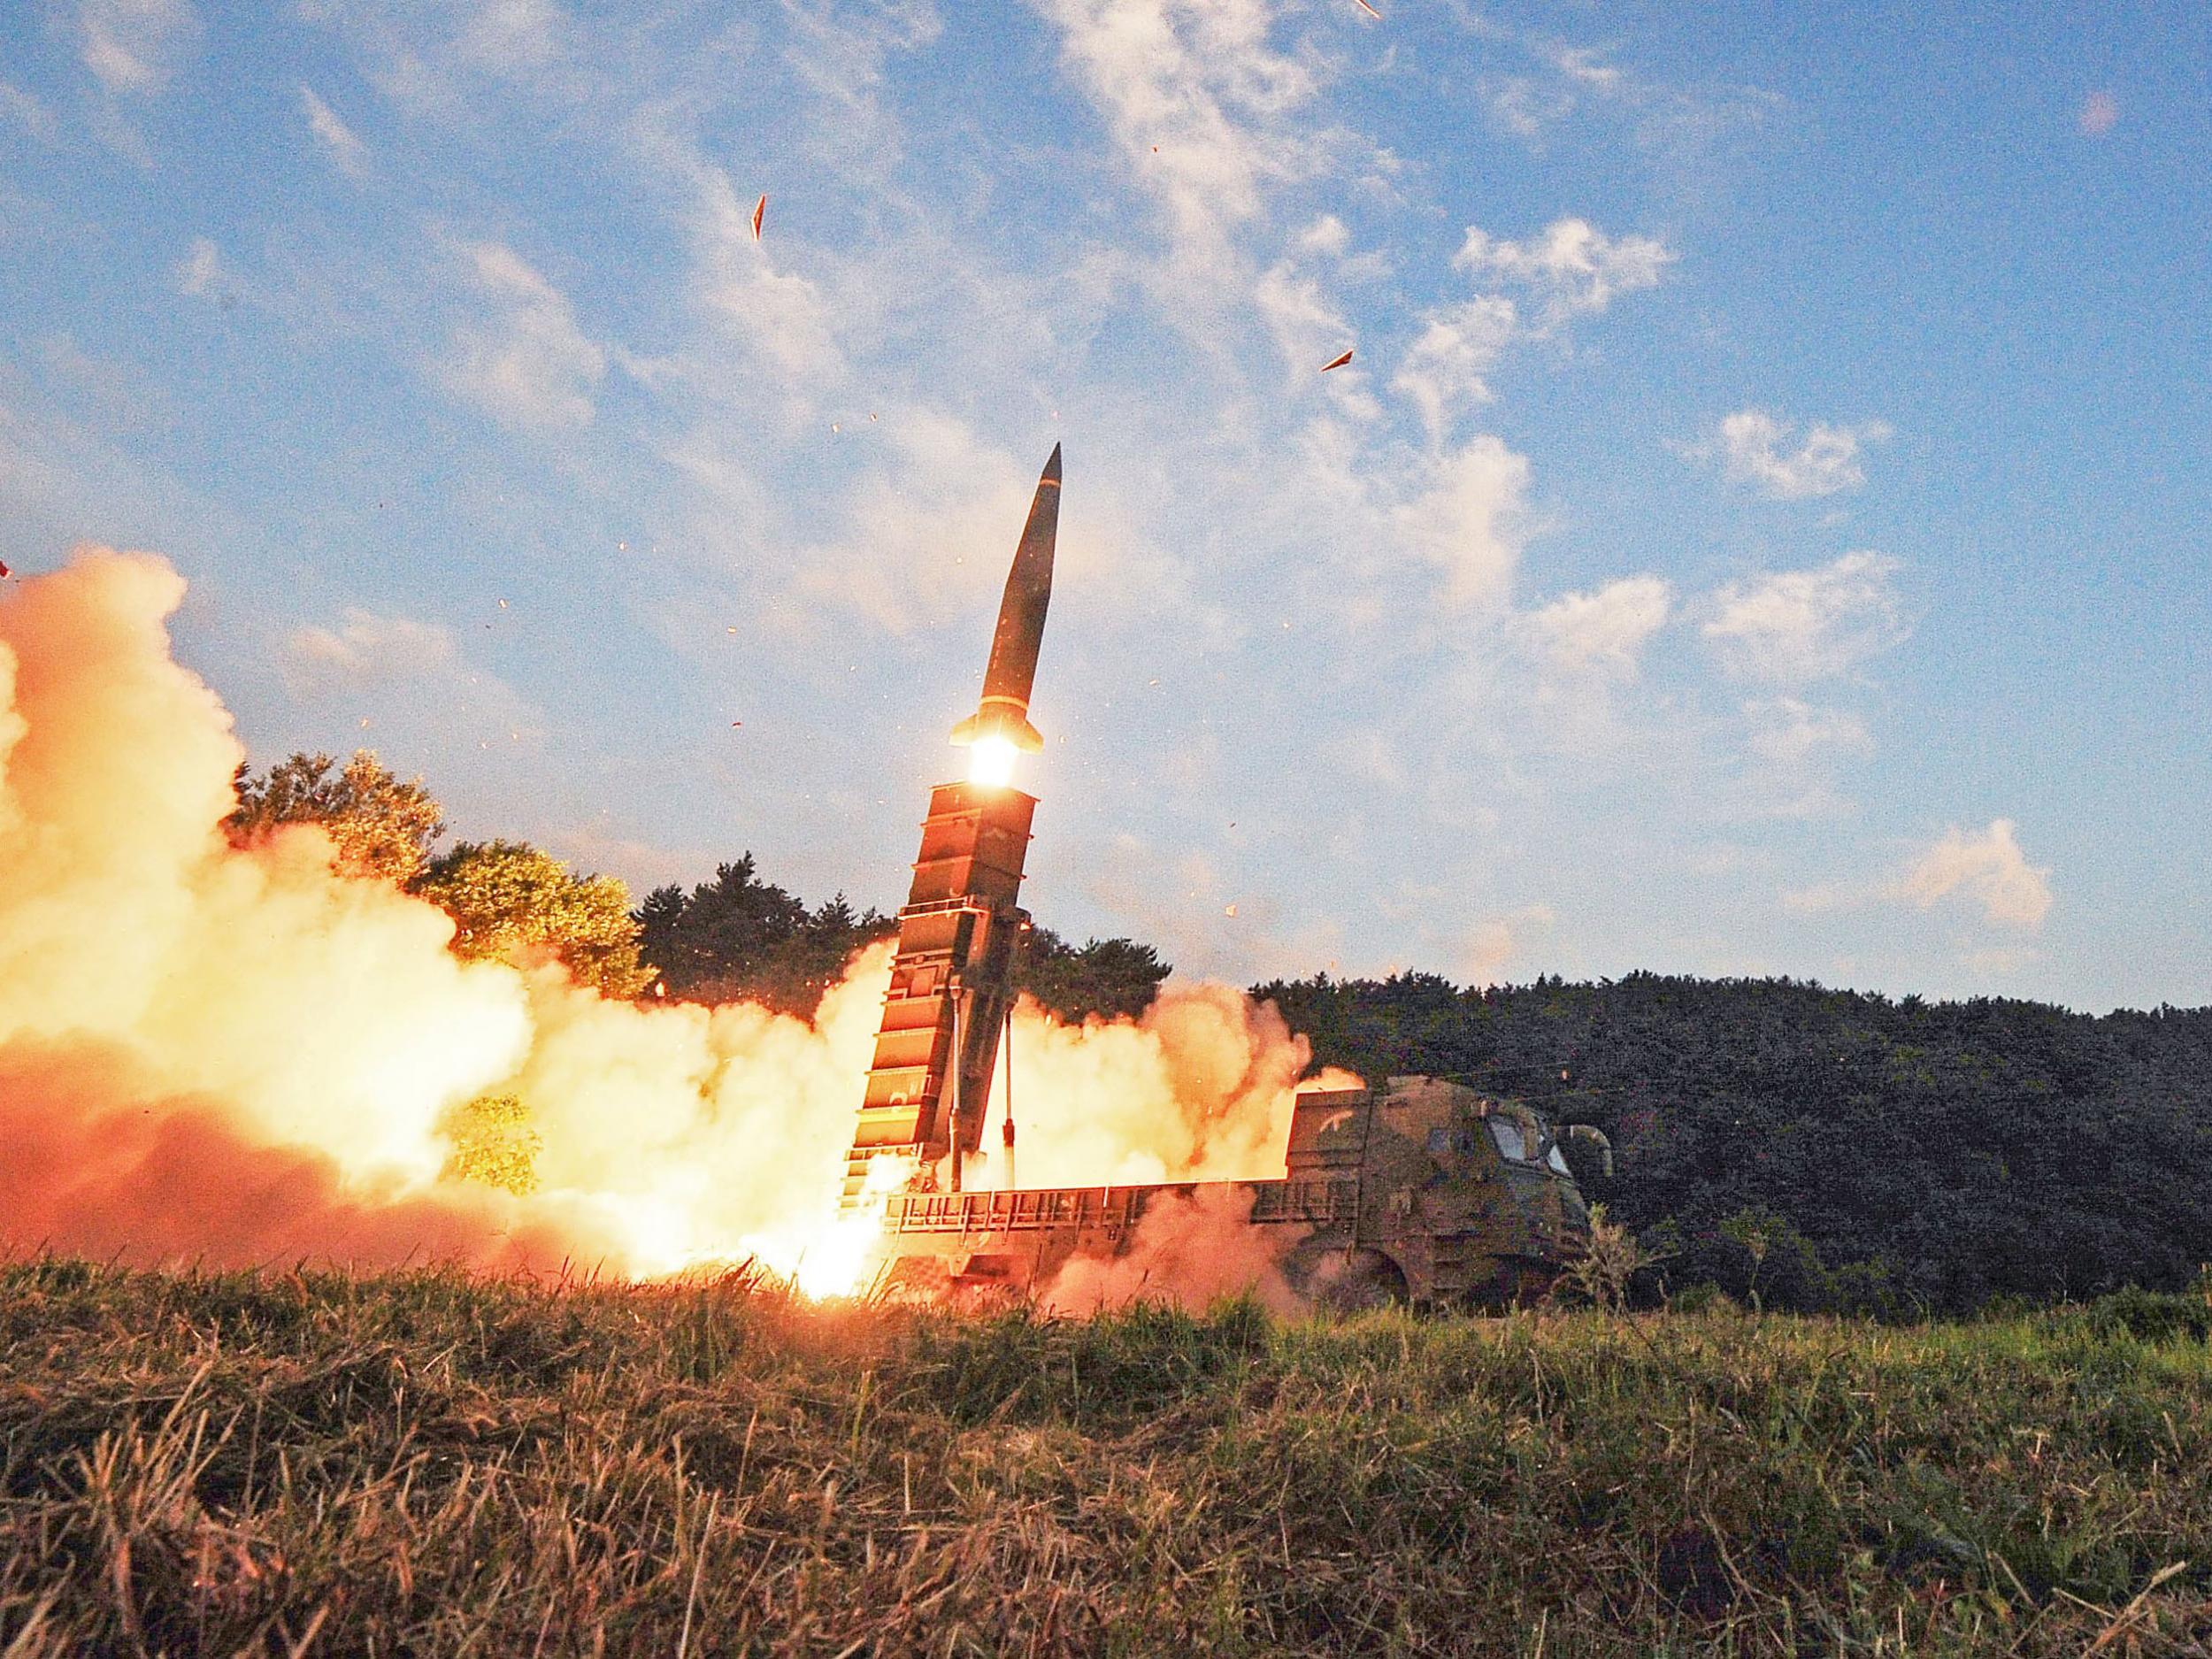 The 'Frankenmissile' would be vastly more powerful the Hyunmoo ballistic missiles that South Korea currently uses